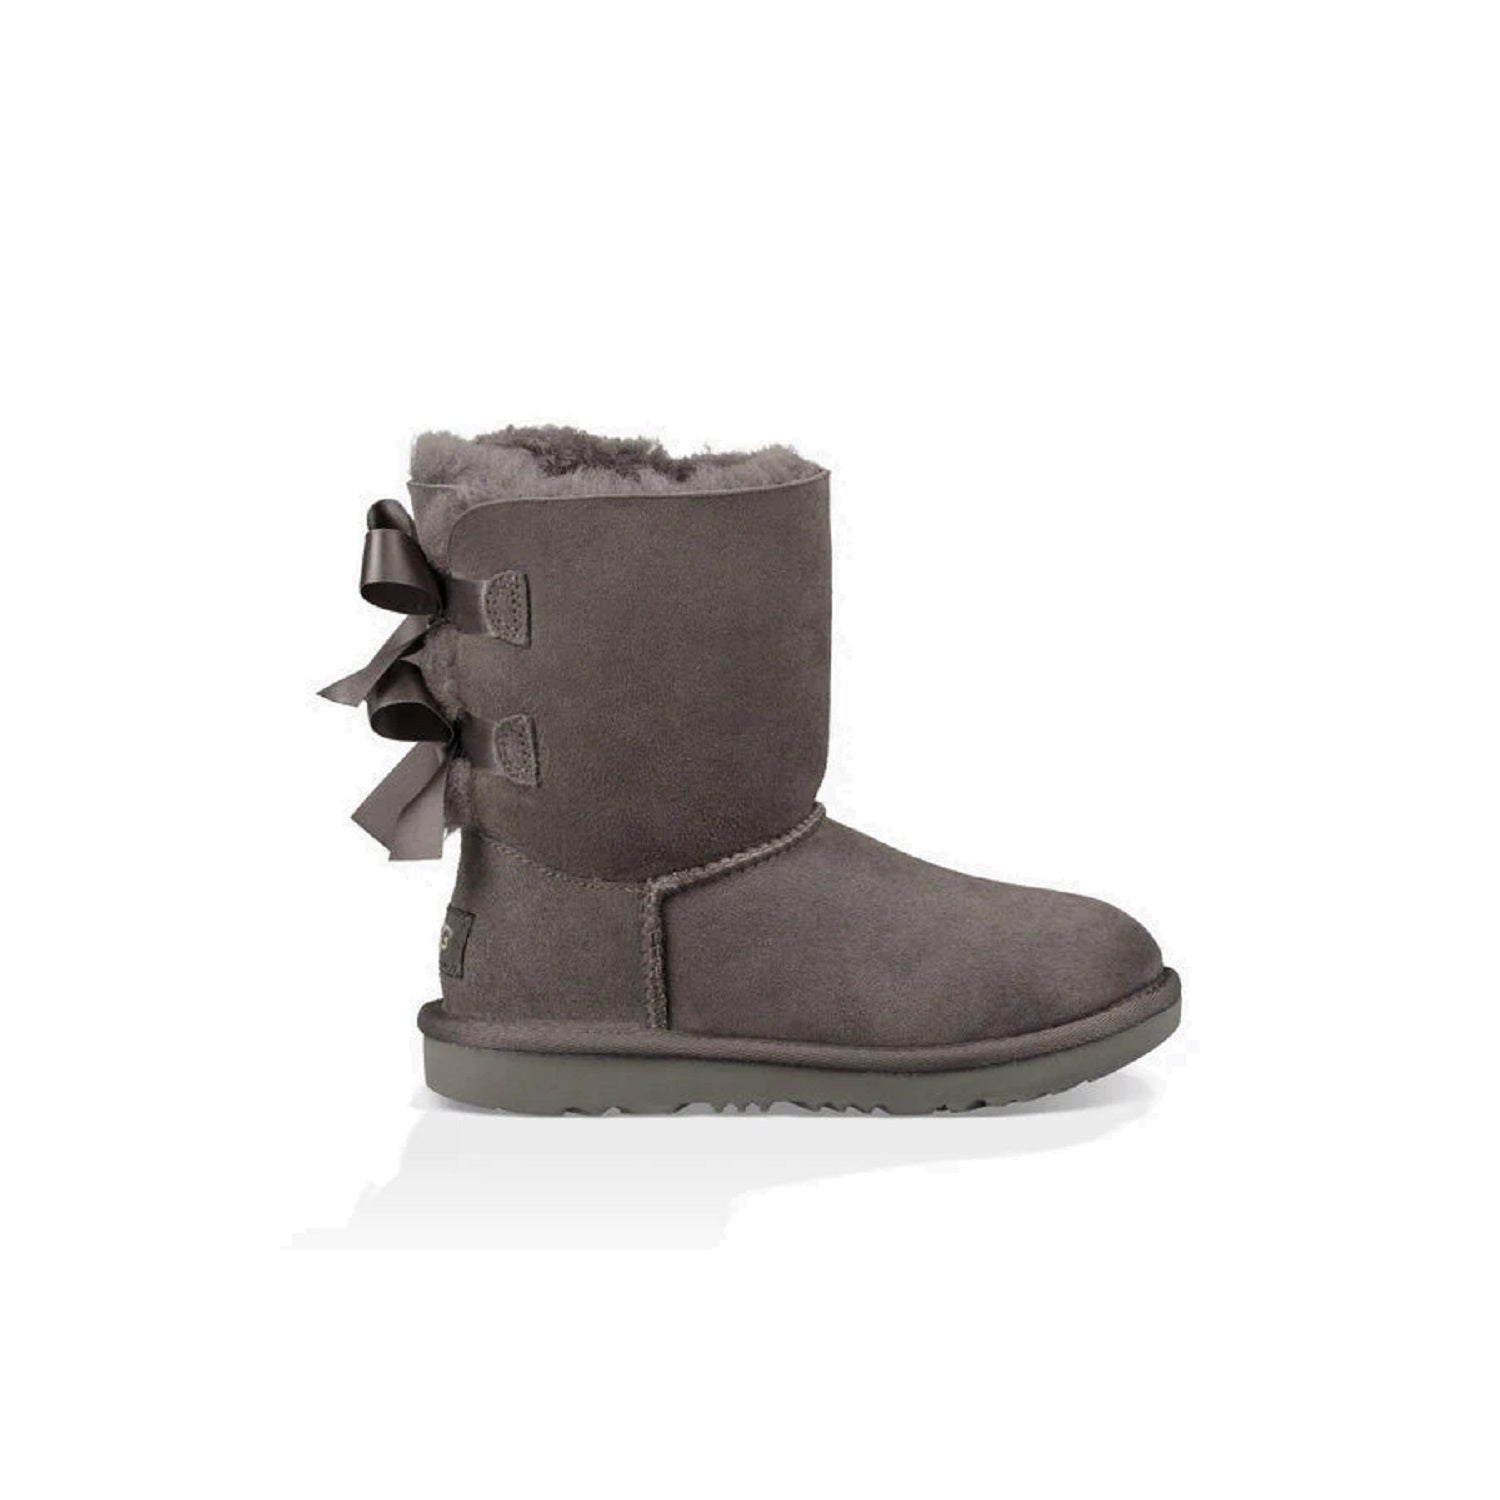 Kid's boot with two bows on the back in grey.